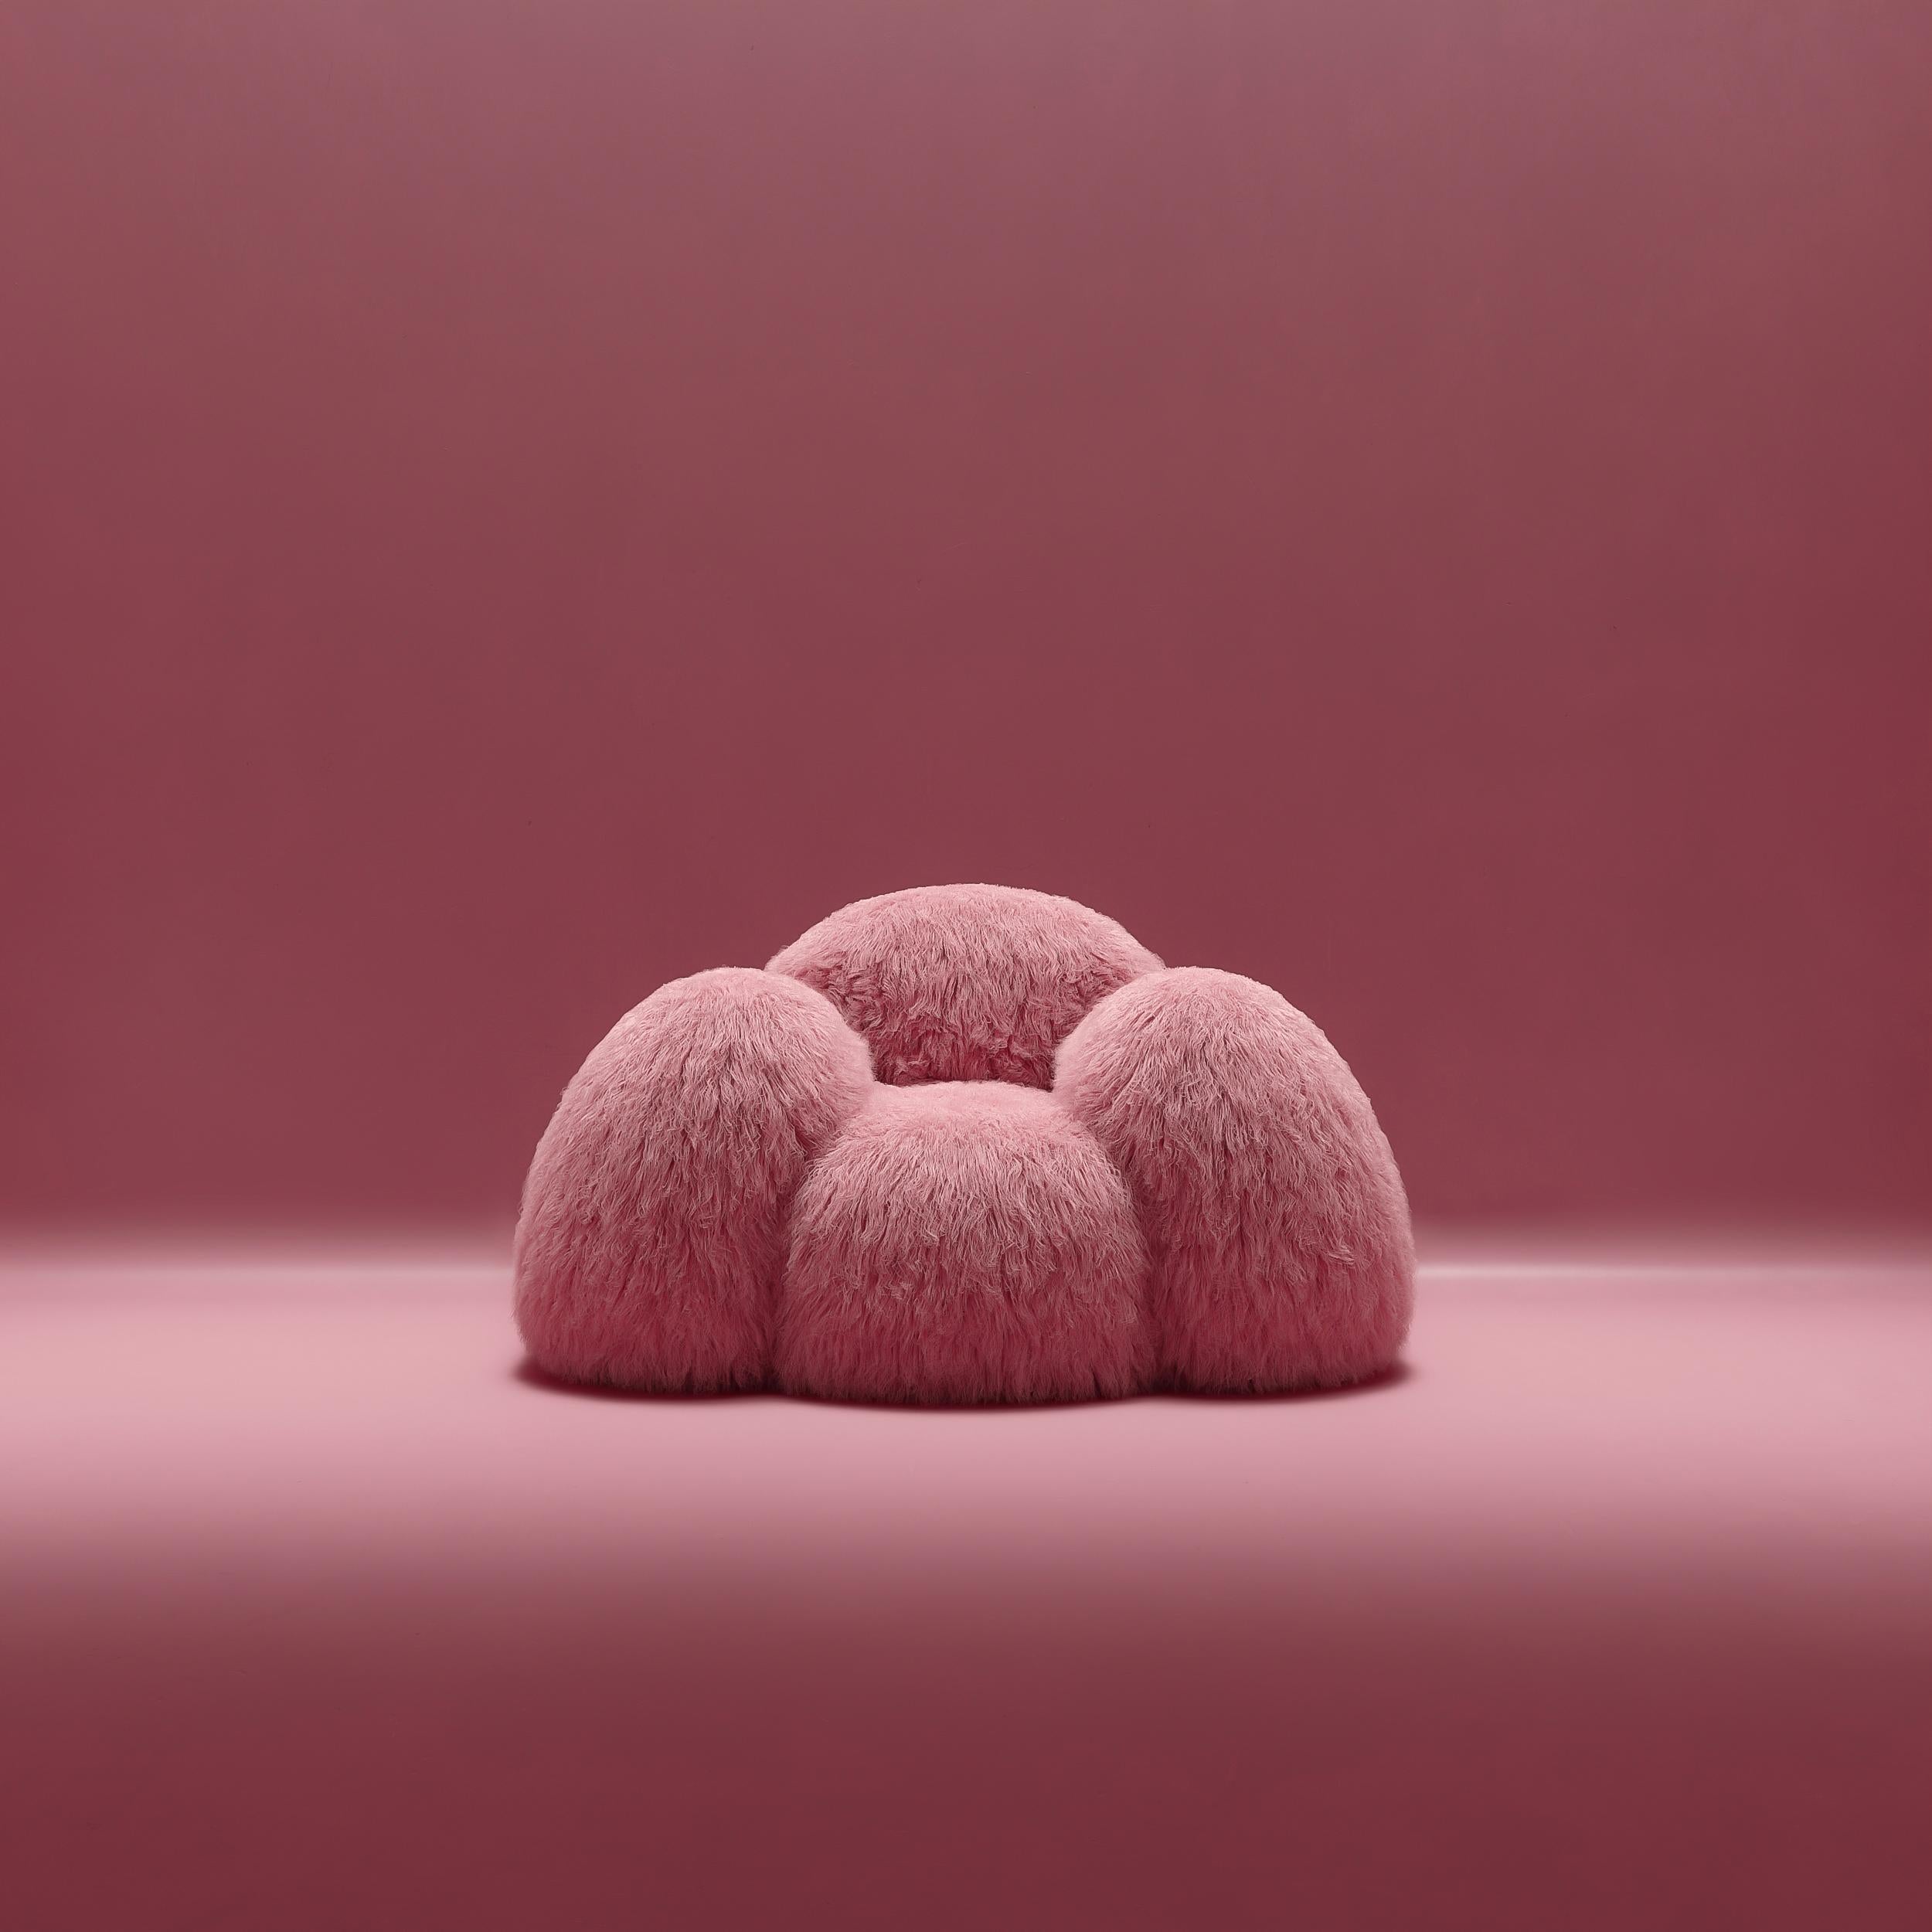 Yeti armchair by Vladimir Naumov
Dimensions: H 79 x W 141.5 x L 108 cm
Materials: Faux Lama Fur

Yeti furniture series – minimalistic and huge, a soft and cozy pink cloud. Its bloated forms seem to cover you with a feeling of comfort, while the faux